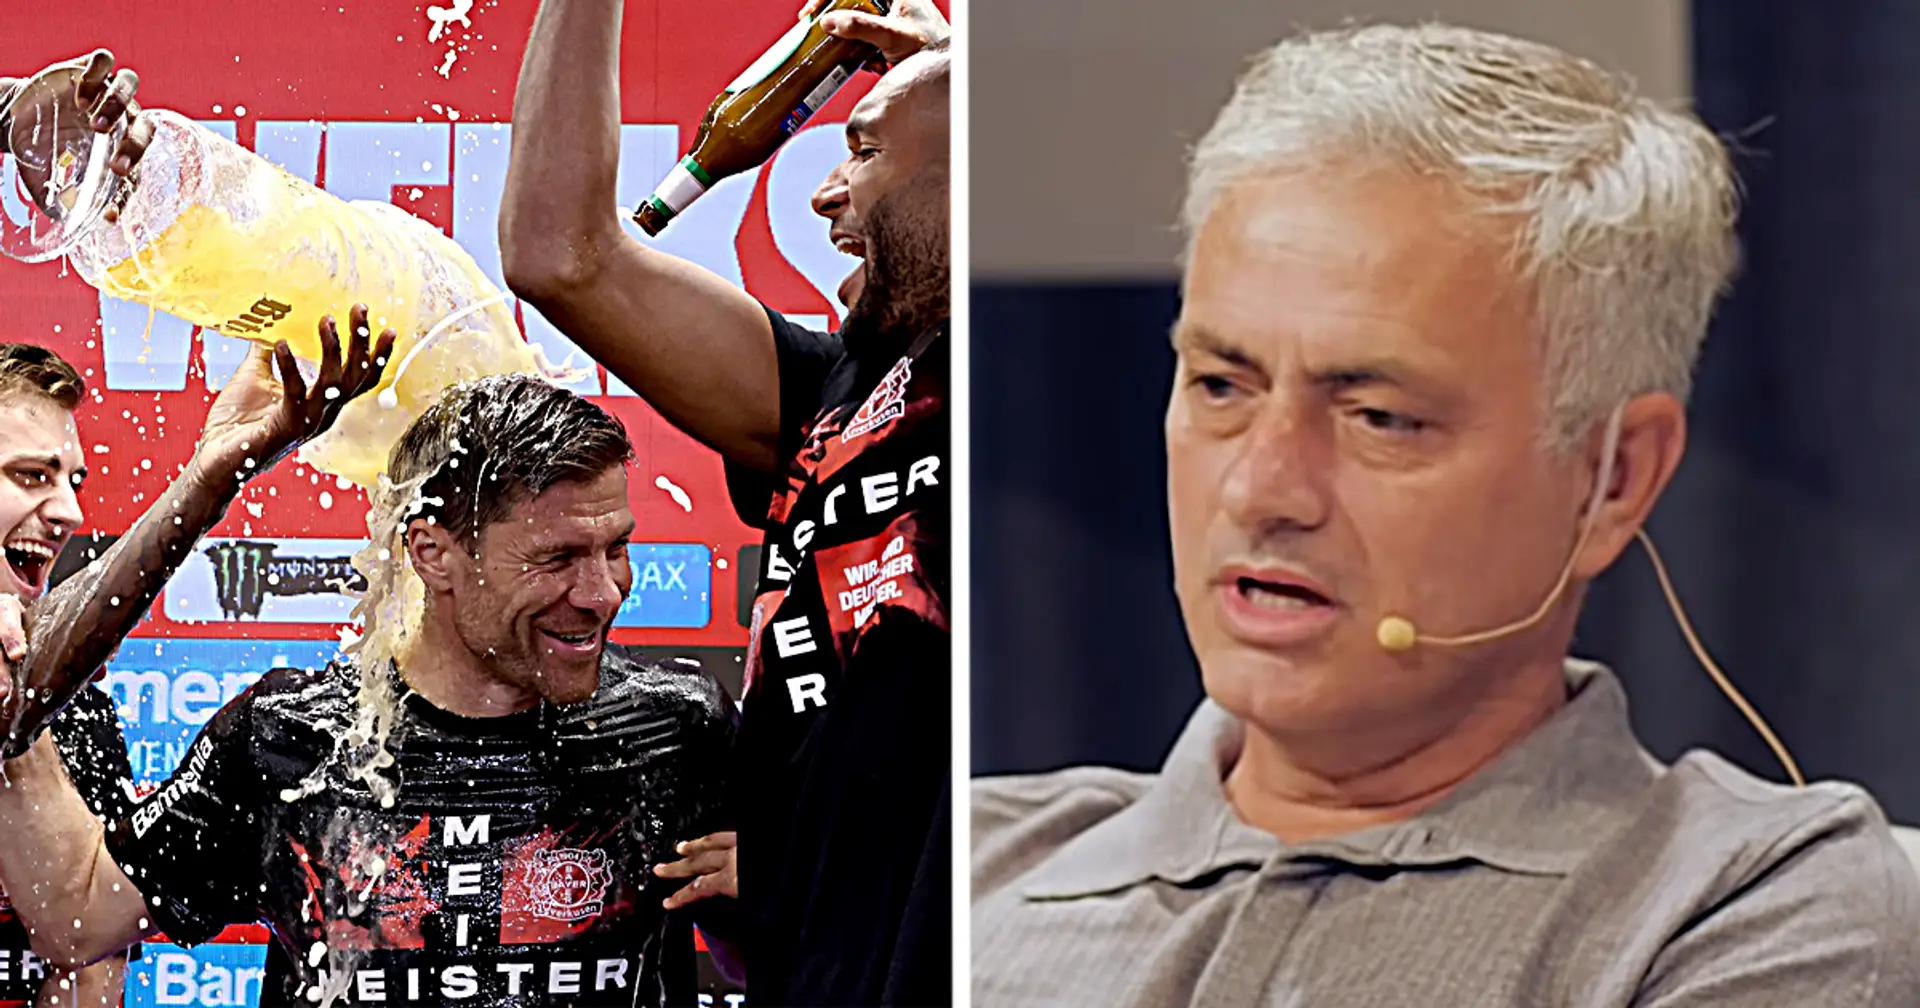 Turns out, José Mourinho predicted Xabi Alonso's success back in 2019!